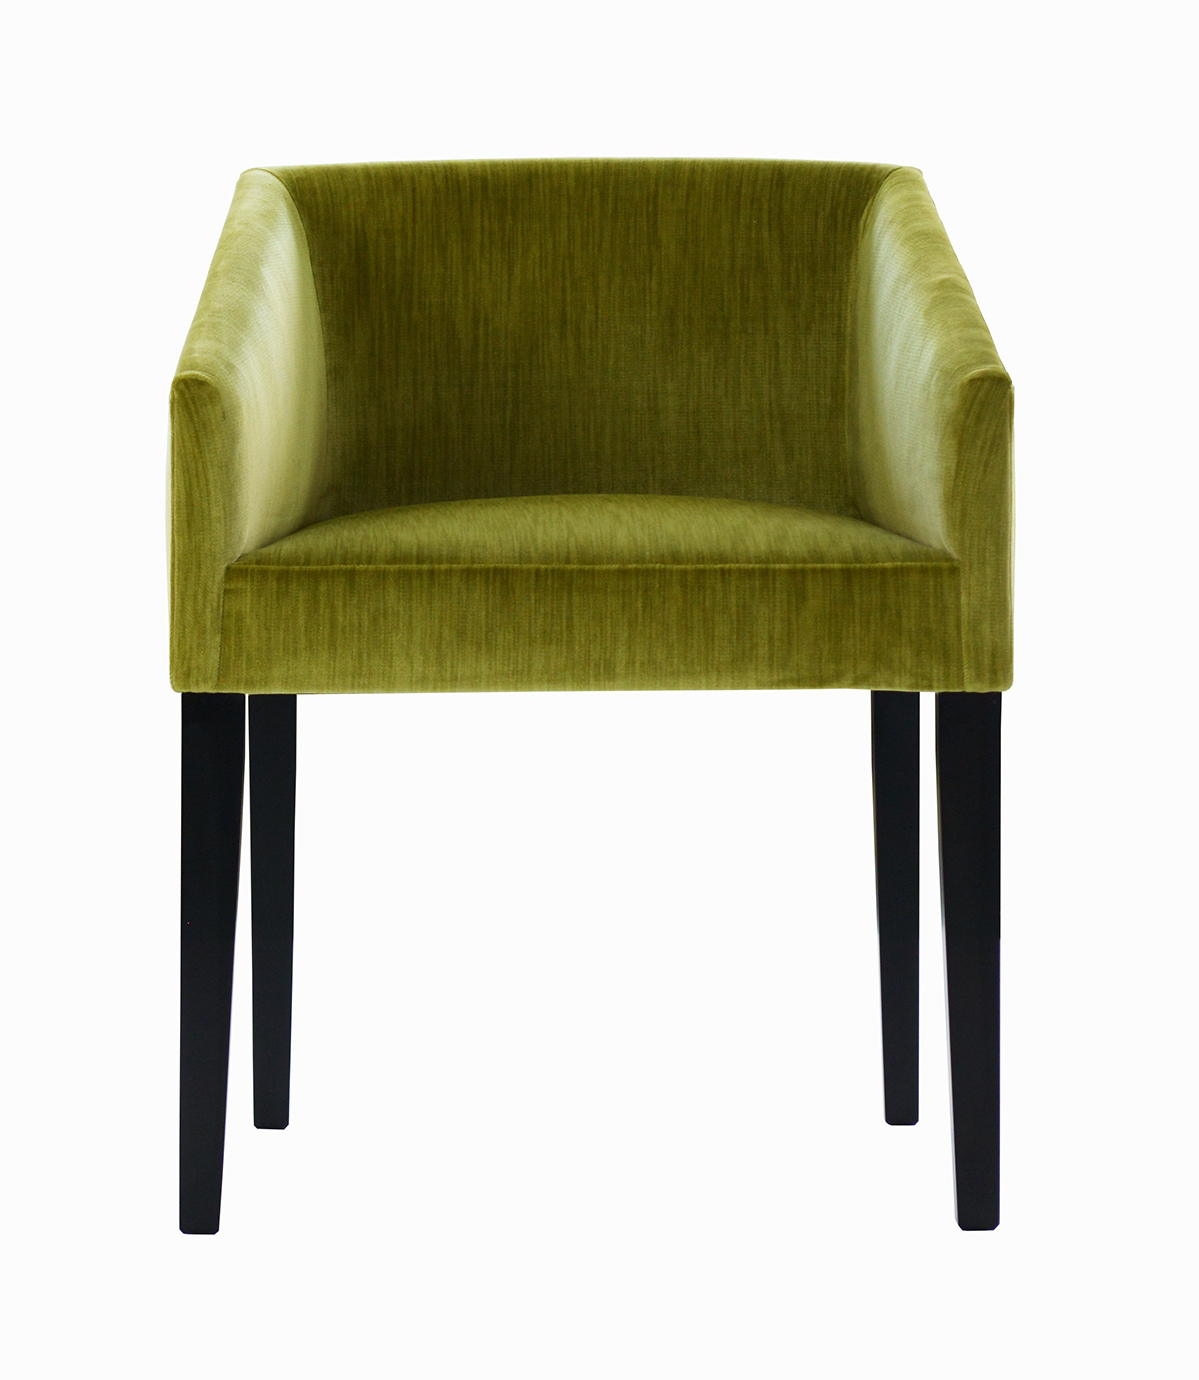 Nathan Anthony Martini chair